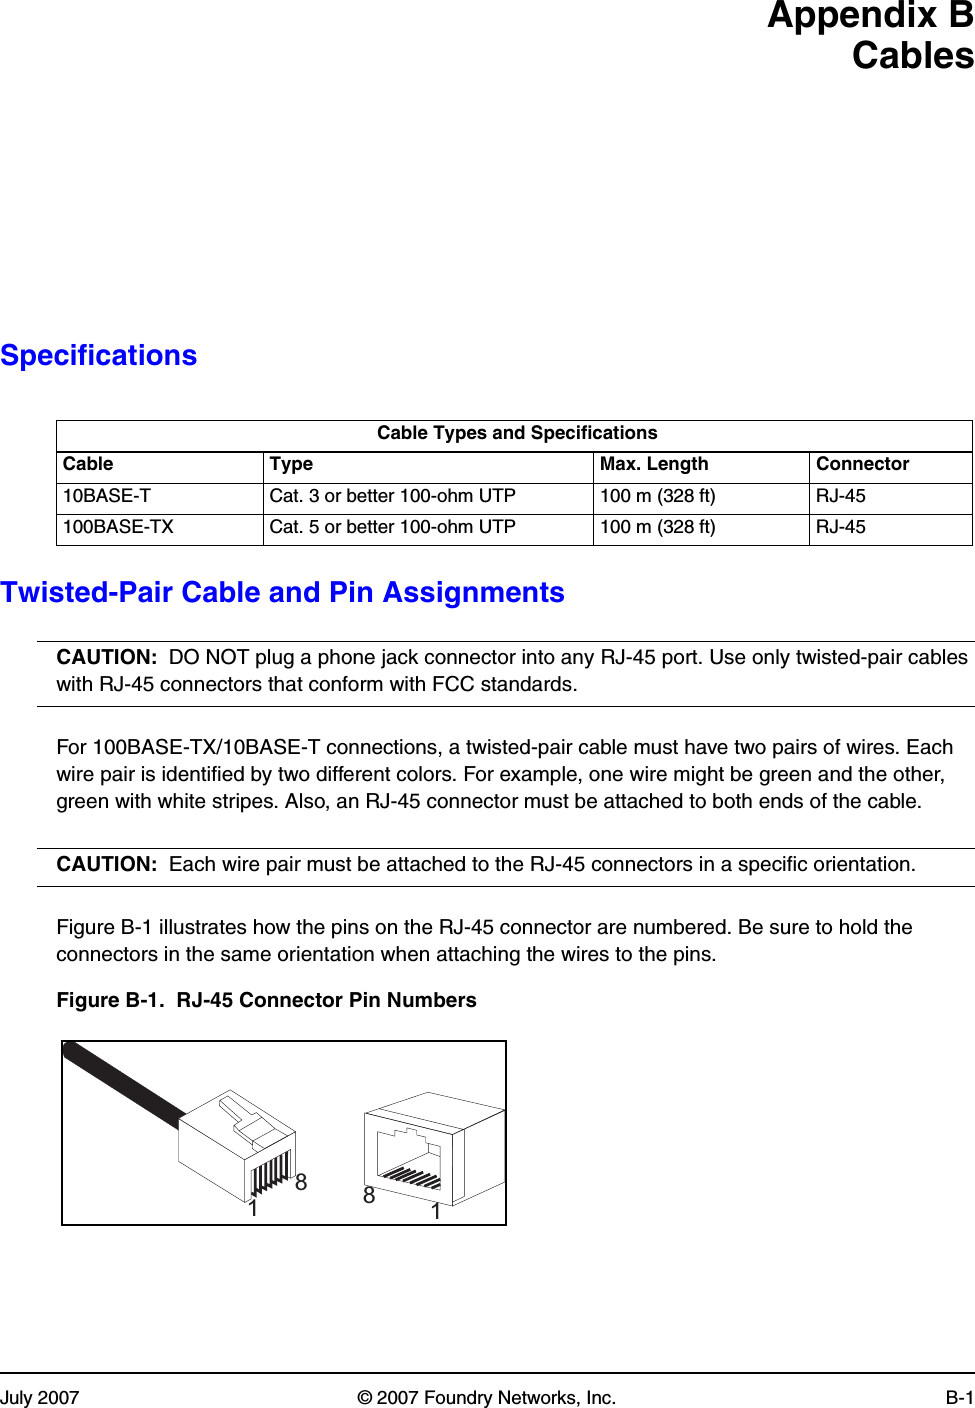 July 2007 © 2007 Foundry Networks, Inc. B-1Appendix BCablesSpecifications  Twisted-Pair Cable and Pin AssignmentsCAUTION: DO NOT plug a phone jack connector into any RJ-45 port. Use only twisted-pair cables with RJ-45 connectors that conform with FCC standards.For 100BASE-TX/10BASE-T connections, a twisted-pair cable must have two pairs of wires. Each wire pair is identified by two different colors. For example, one wire might be green and the other, green with white stripes. Also, an RJ-45 connector must be attached to both ends of the cable.CAUTION: Each wire pair must be attached to the RJ-45 connectors in a specific orientation.Figure B-1 illustrates how the pins on the RJ-45 connector are numbered. Be sure to hold the connectors in the same orientation when attaching the wires to the pins.Figure B-1.  RJ-45 Connector Pin NumbersCable Types and SpecificationsCable Type Max. Length Connector10BASE-T Cat. 3 or better 100-ohm UTP 100 m (328 ft) RJ-45100BASE-TX Cat. 5 or better 100-ohm UTP 100 m (328 ft) RJ-451881